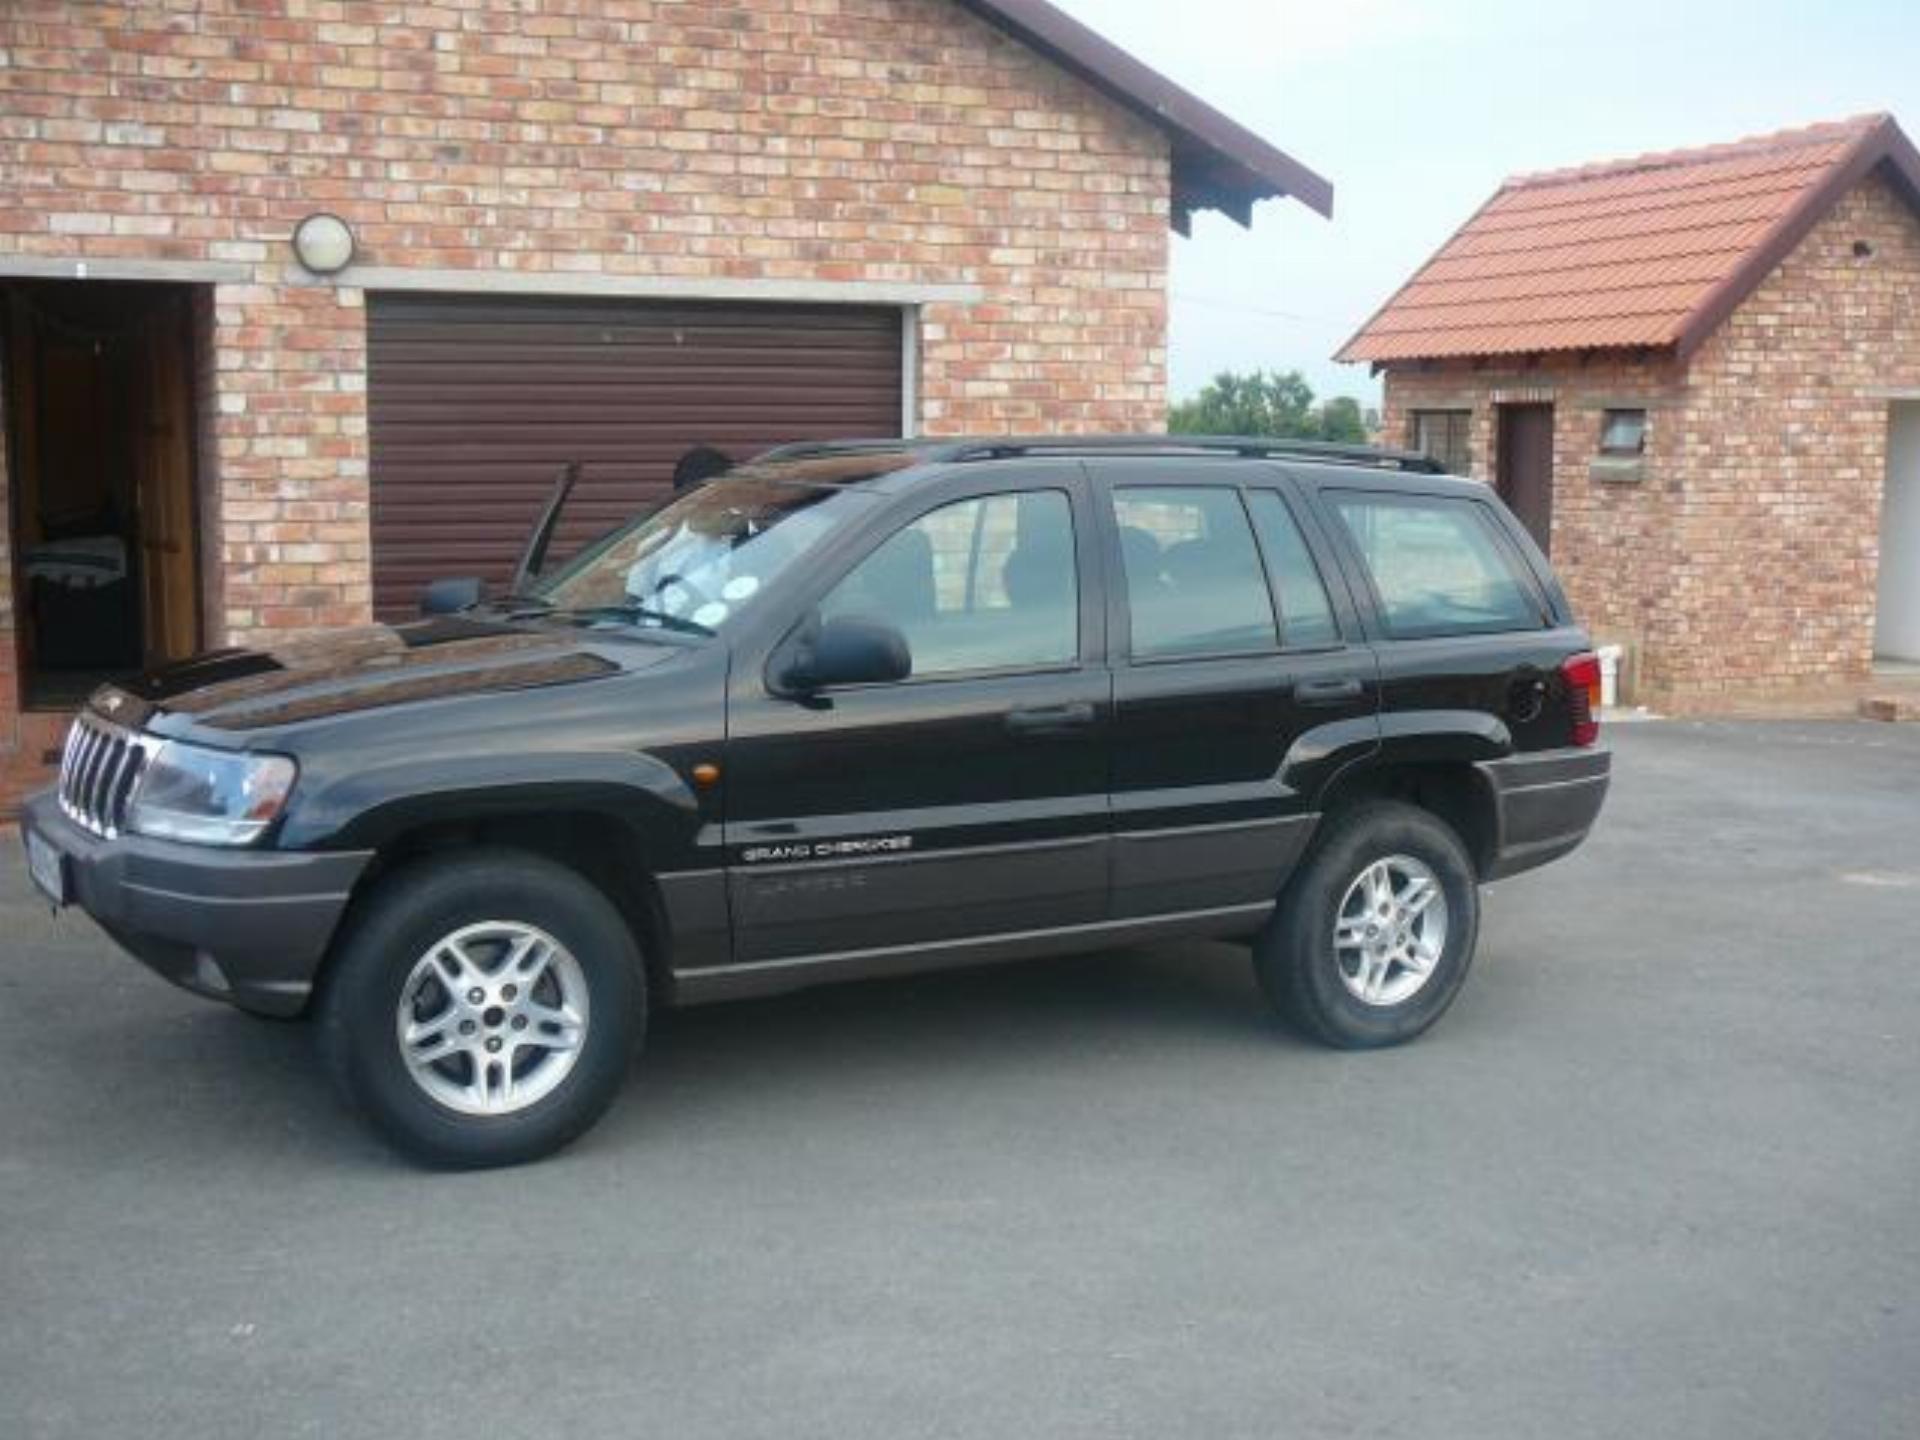 Used Jeep Grand Cherokee 2.7 CRD 2002 on auction PV1000535